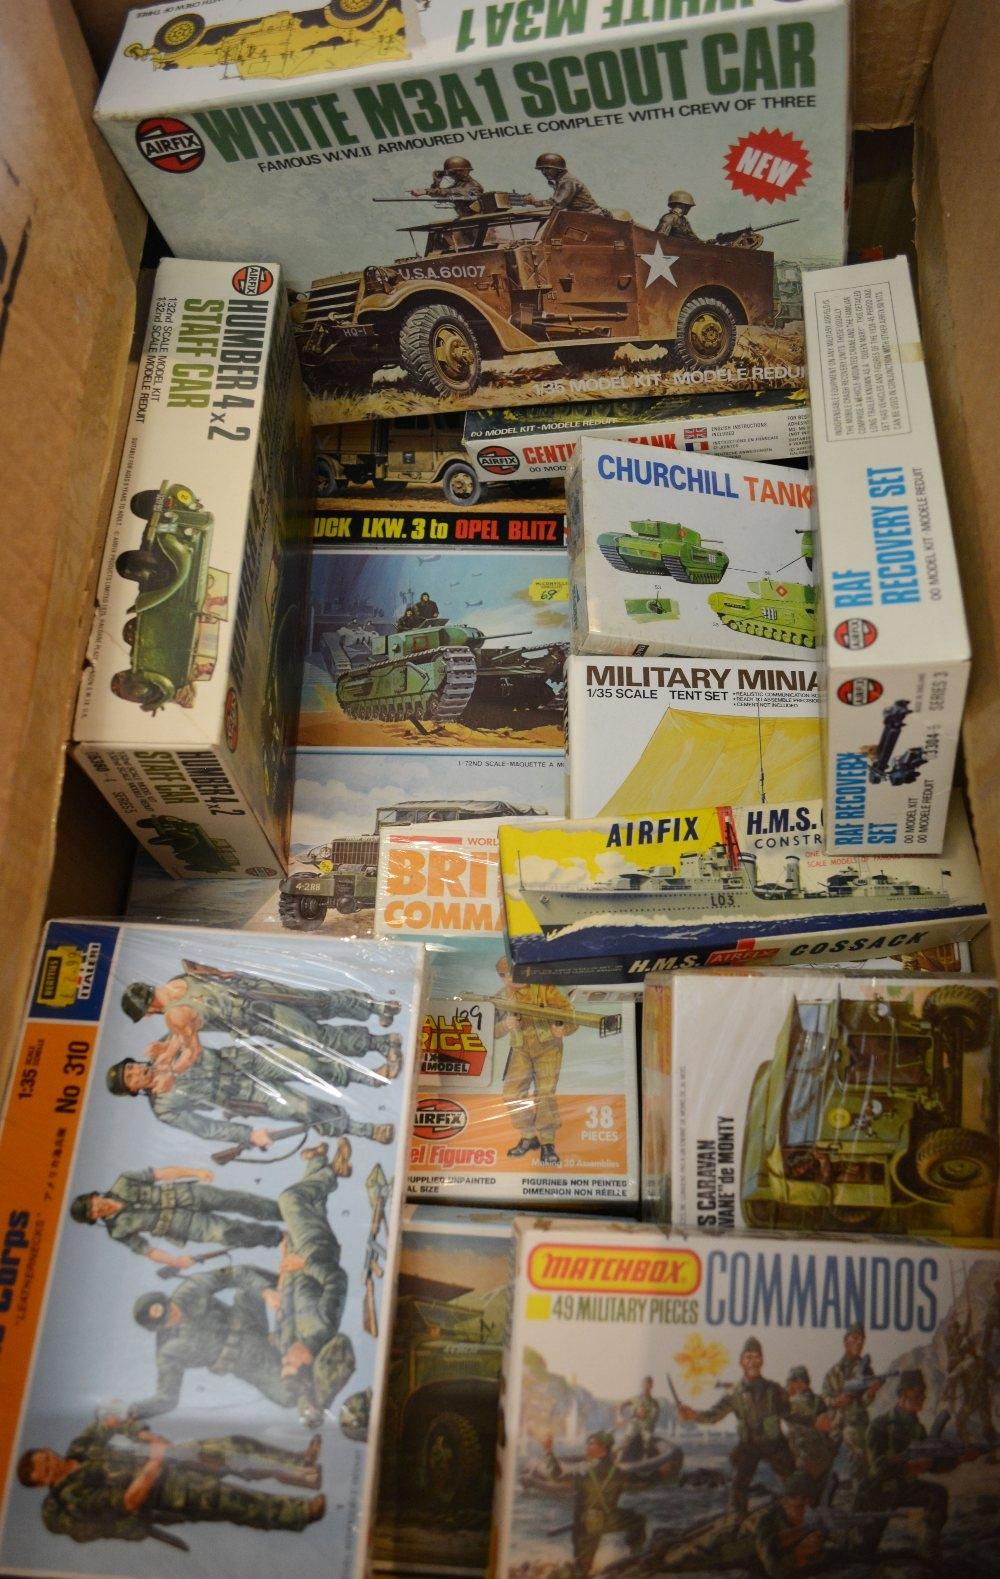 A Collection of Airfix, Revell, Matchbox and other Model Kits, military and others - Image 2 of 2